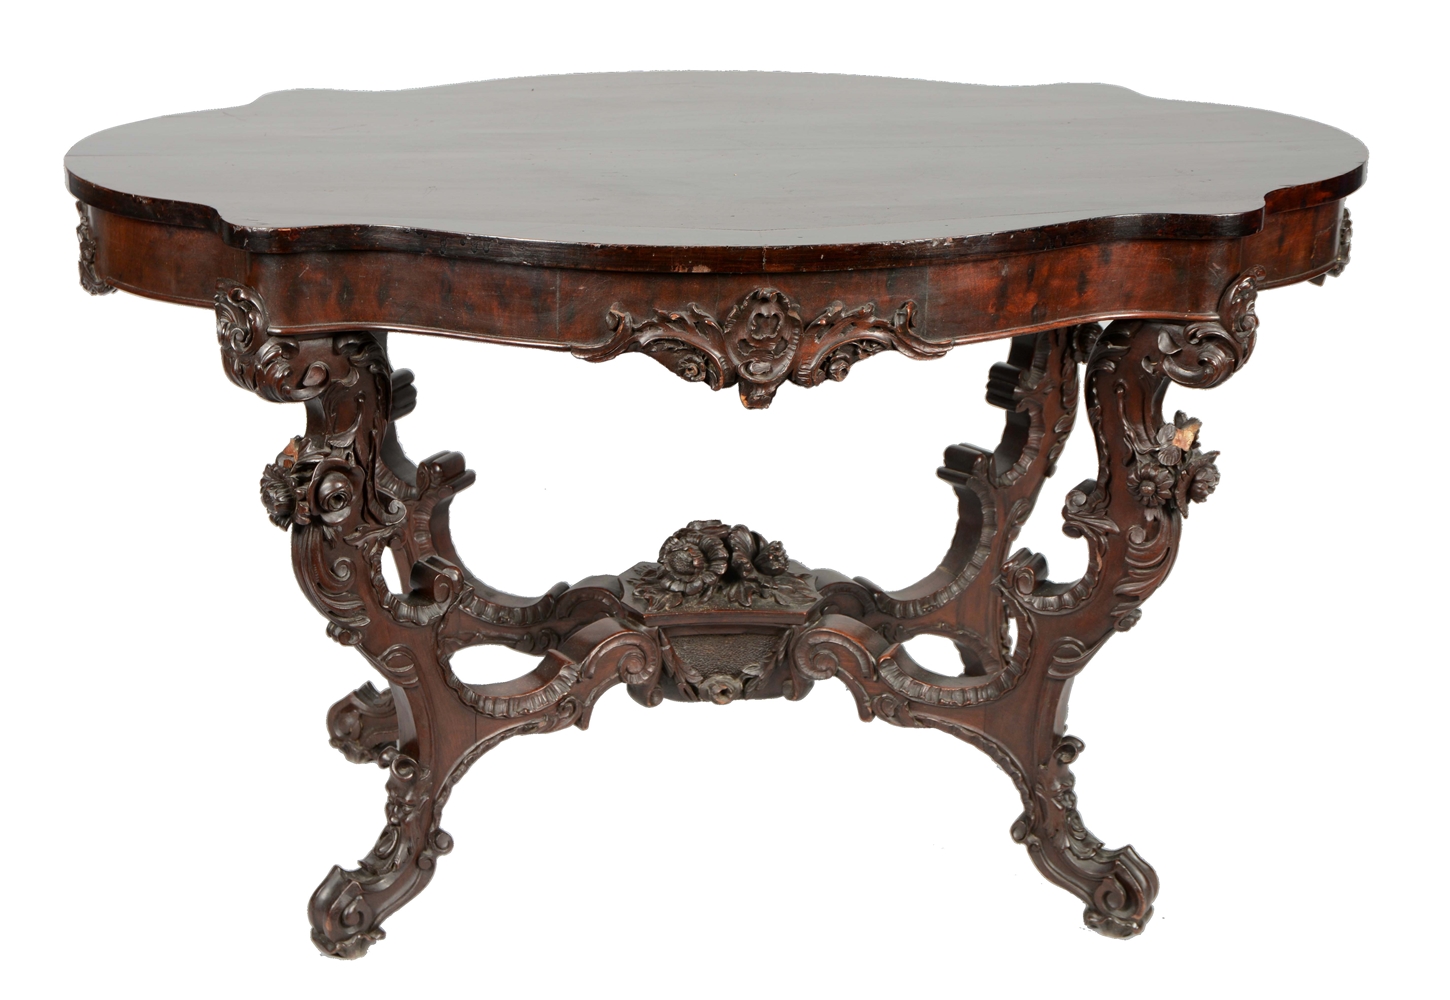 HEAVILY CARVED VICTORIAN TABLE.